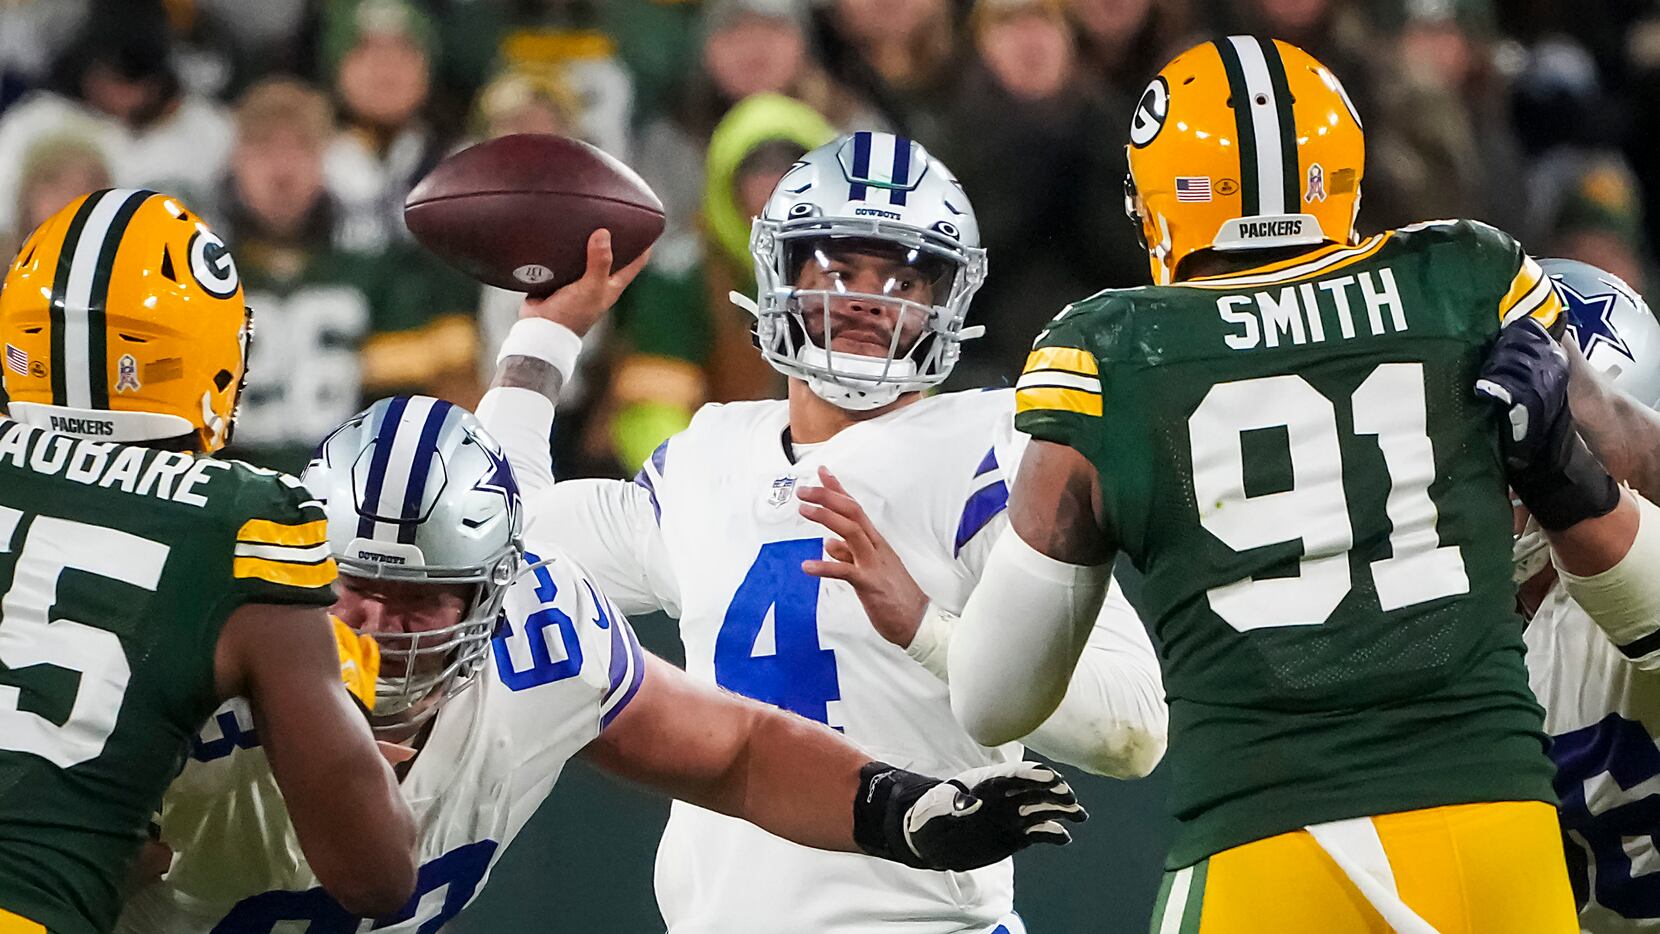 5 takeaways from Cowboys-Packers: Dallas unable to close out